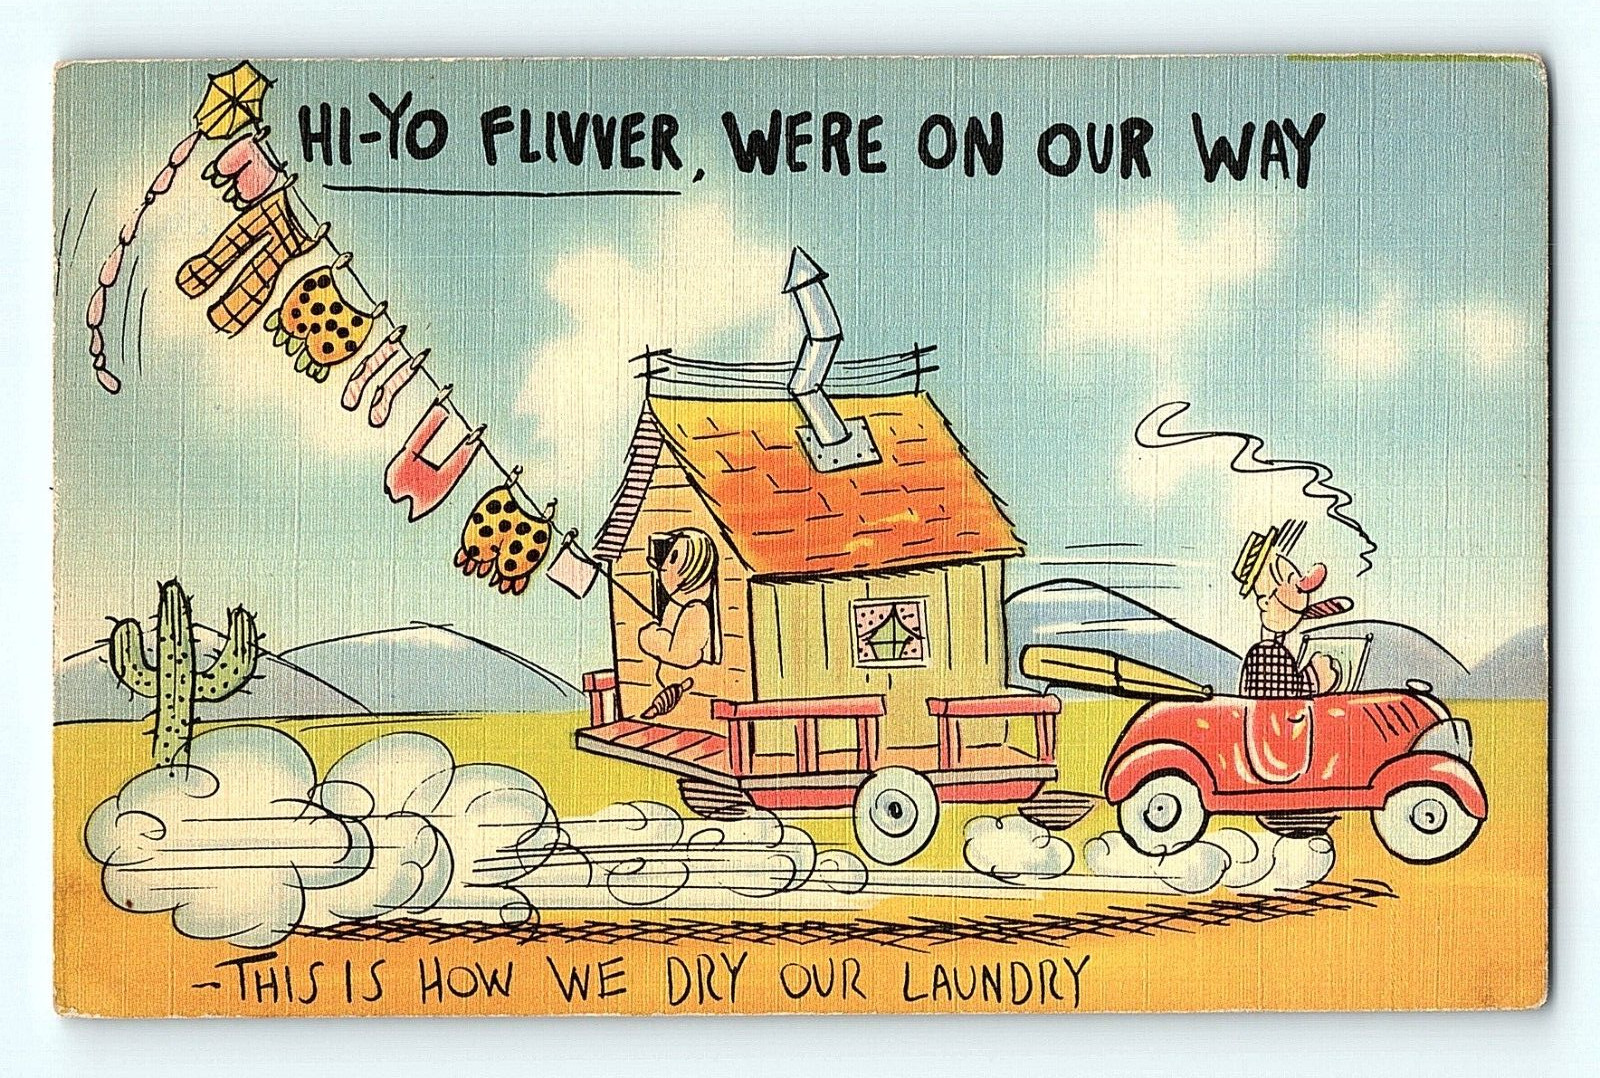 This is How We Dry Our Laundry Cartoon Redneck Humor Vintage Postcard E4